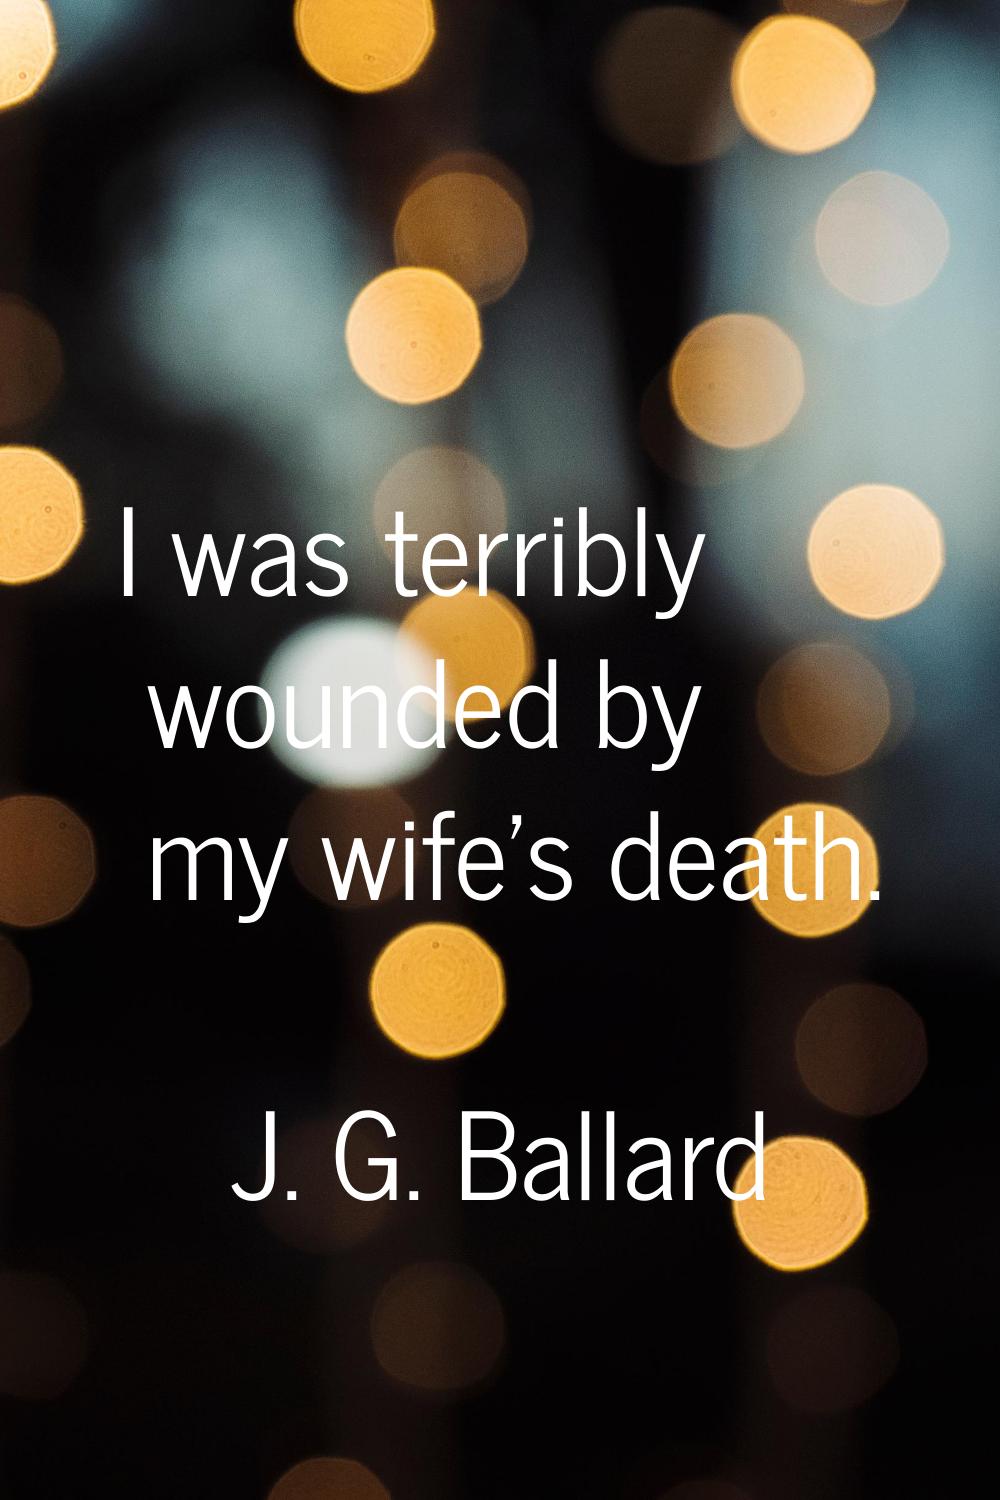 I was terribly wounded by my wife's death.